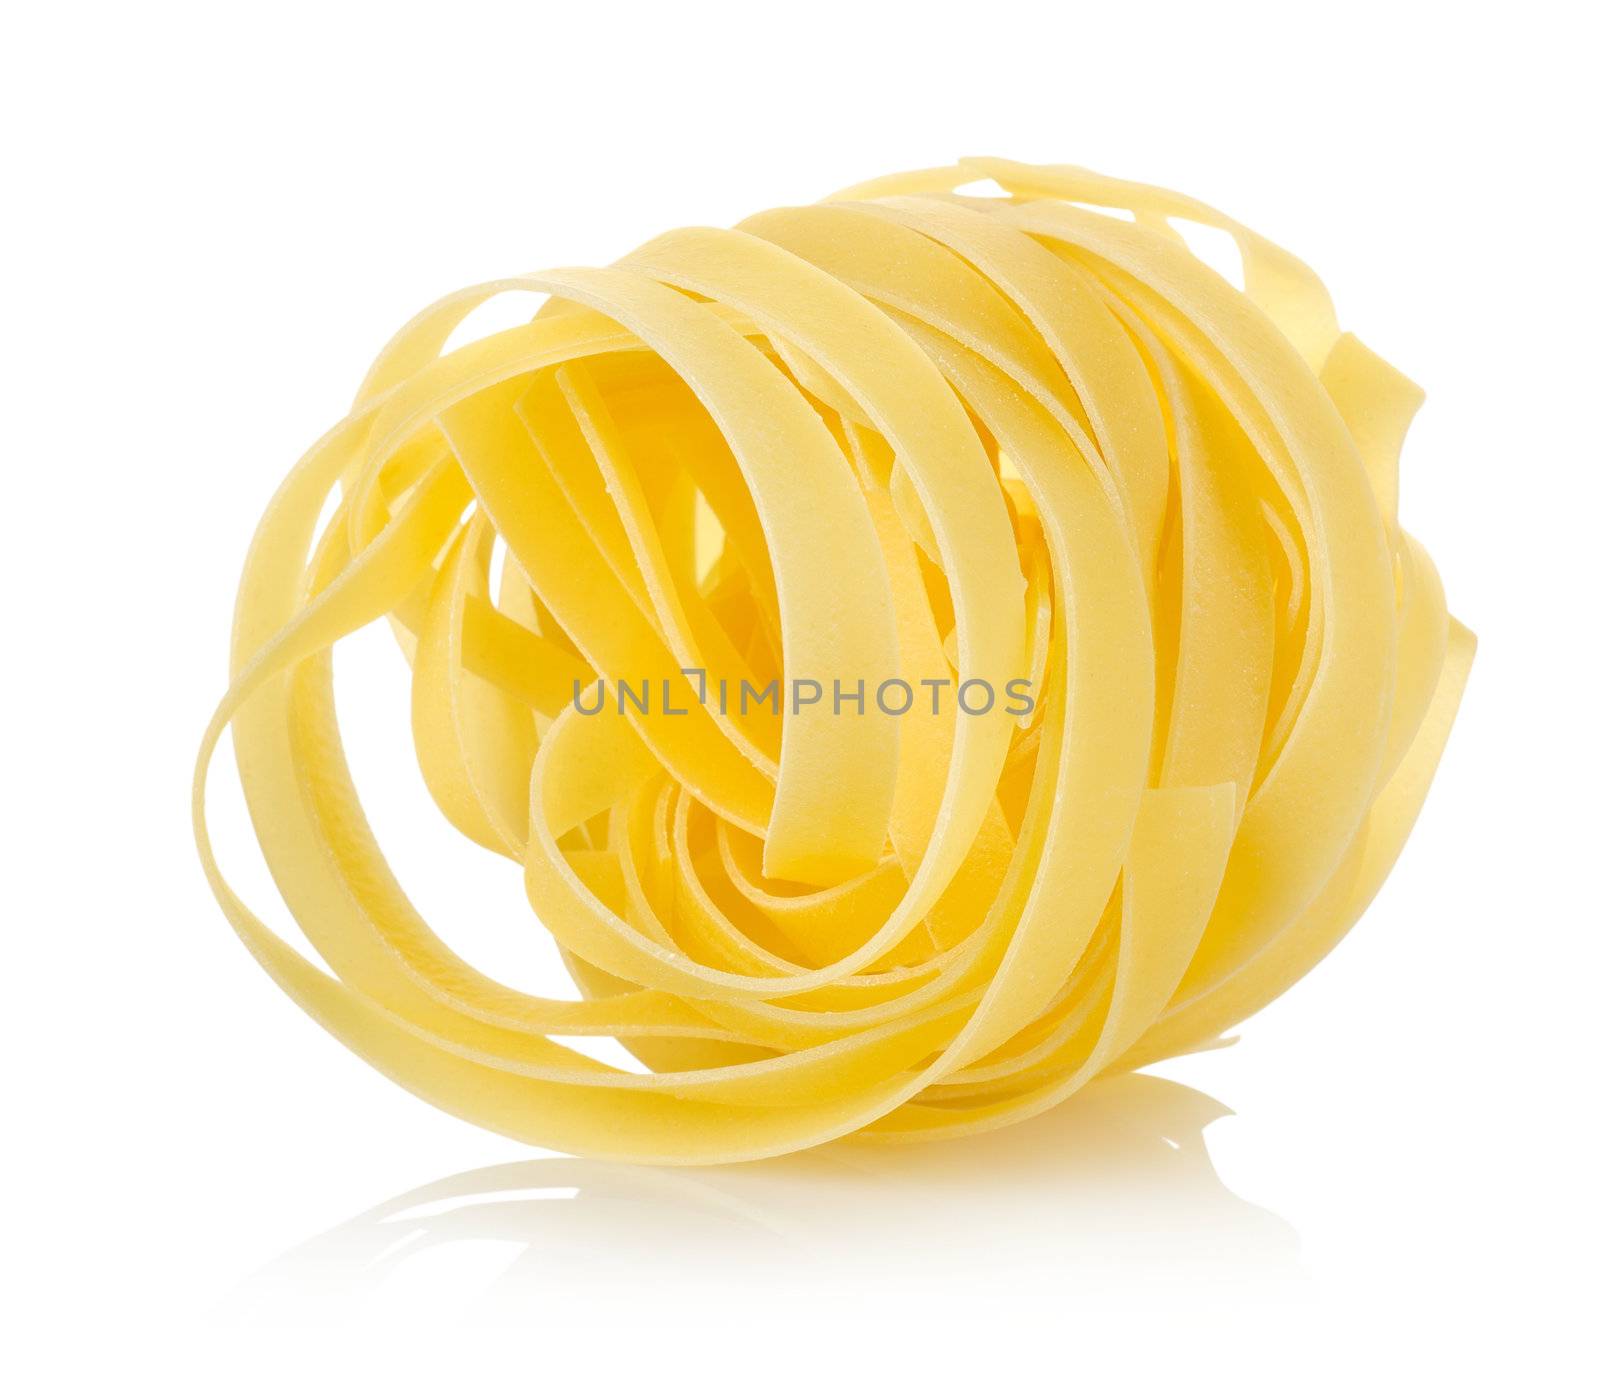 Pasta tagliatelle isolated on a white background